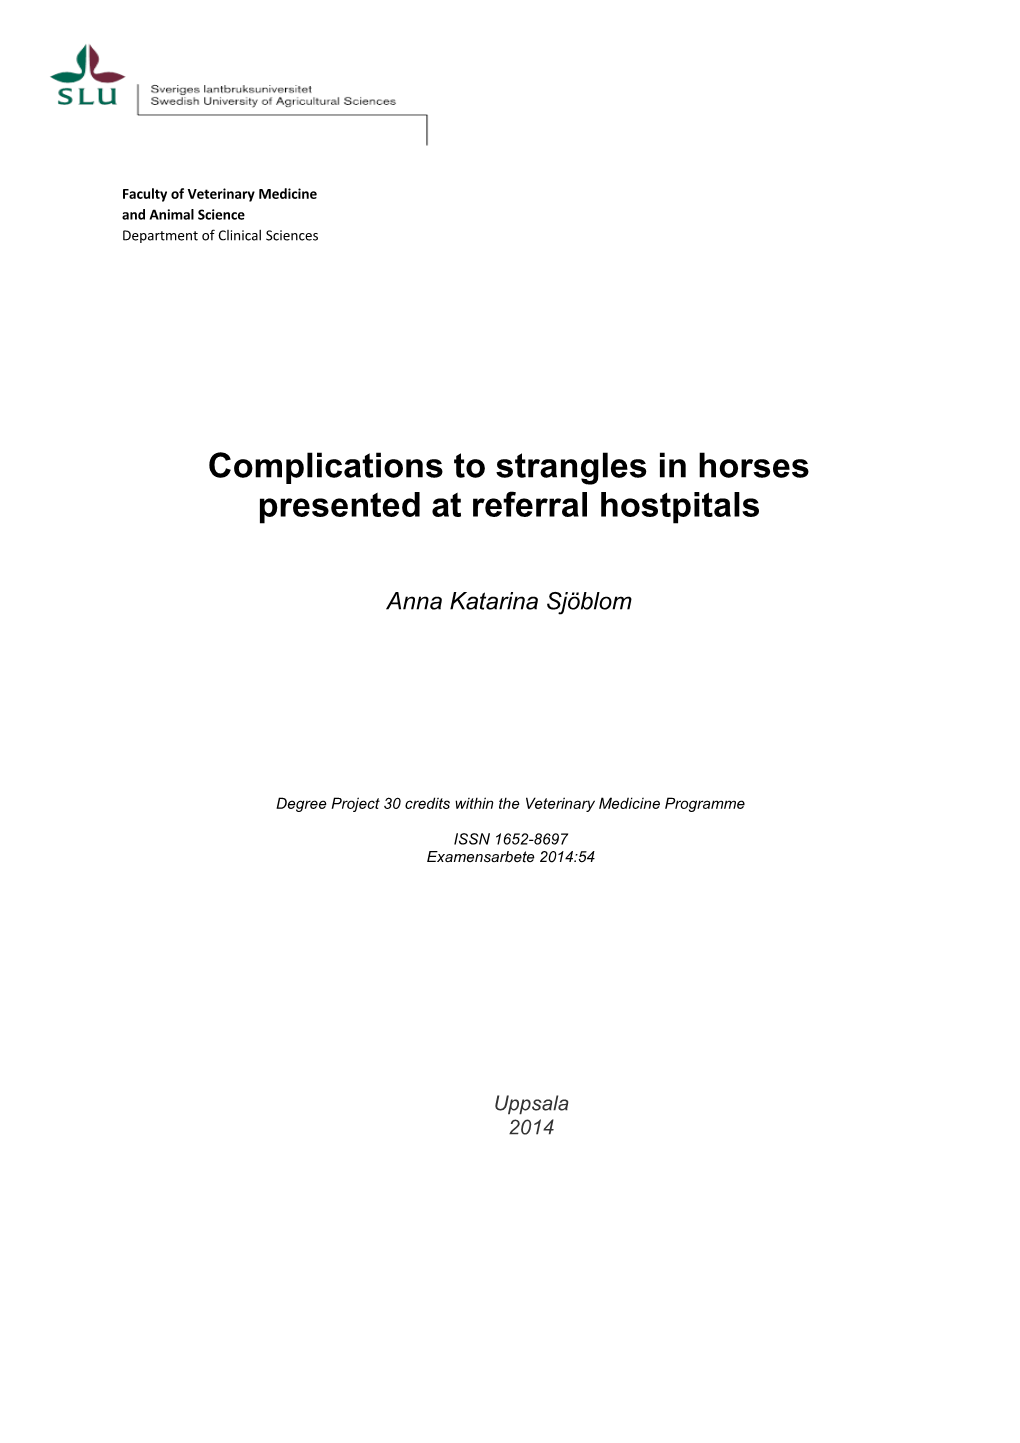 Complications to Strangles in Horses Presented at Referral Hostpitals